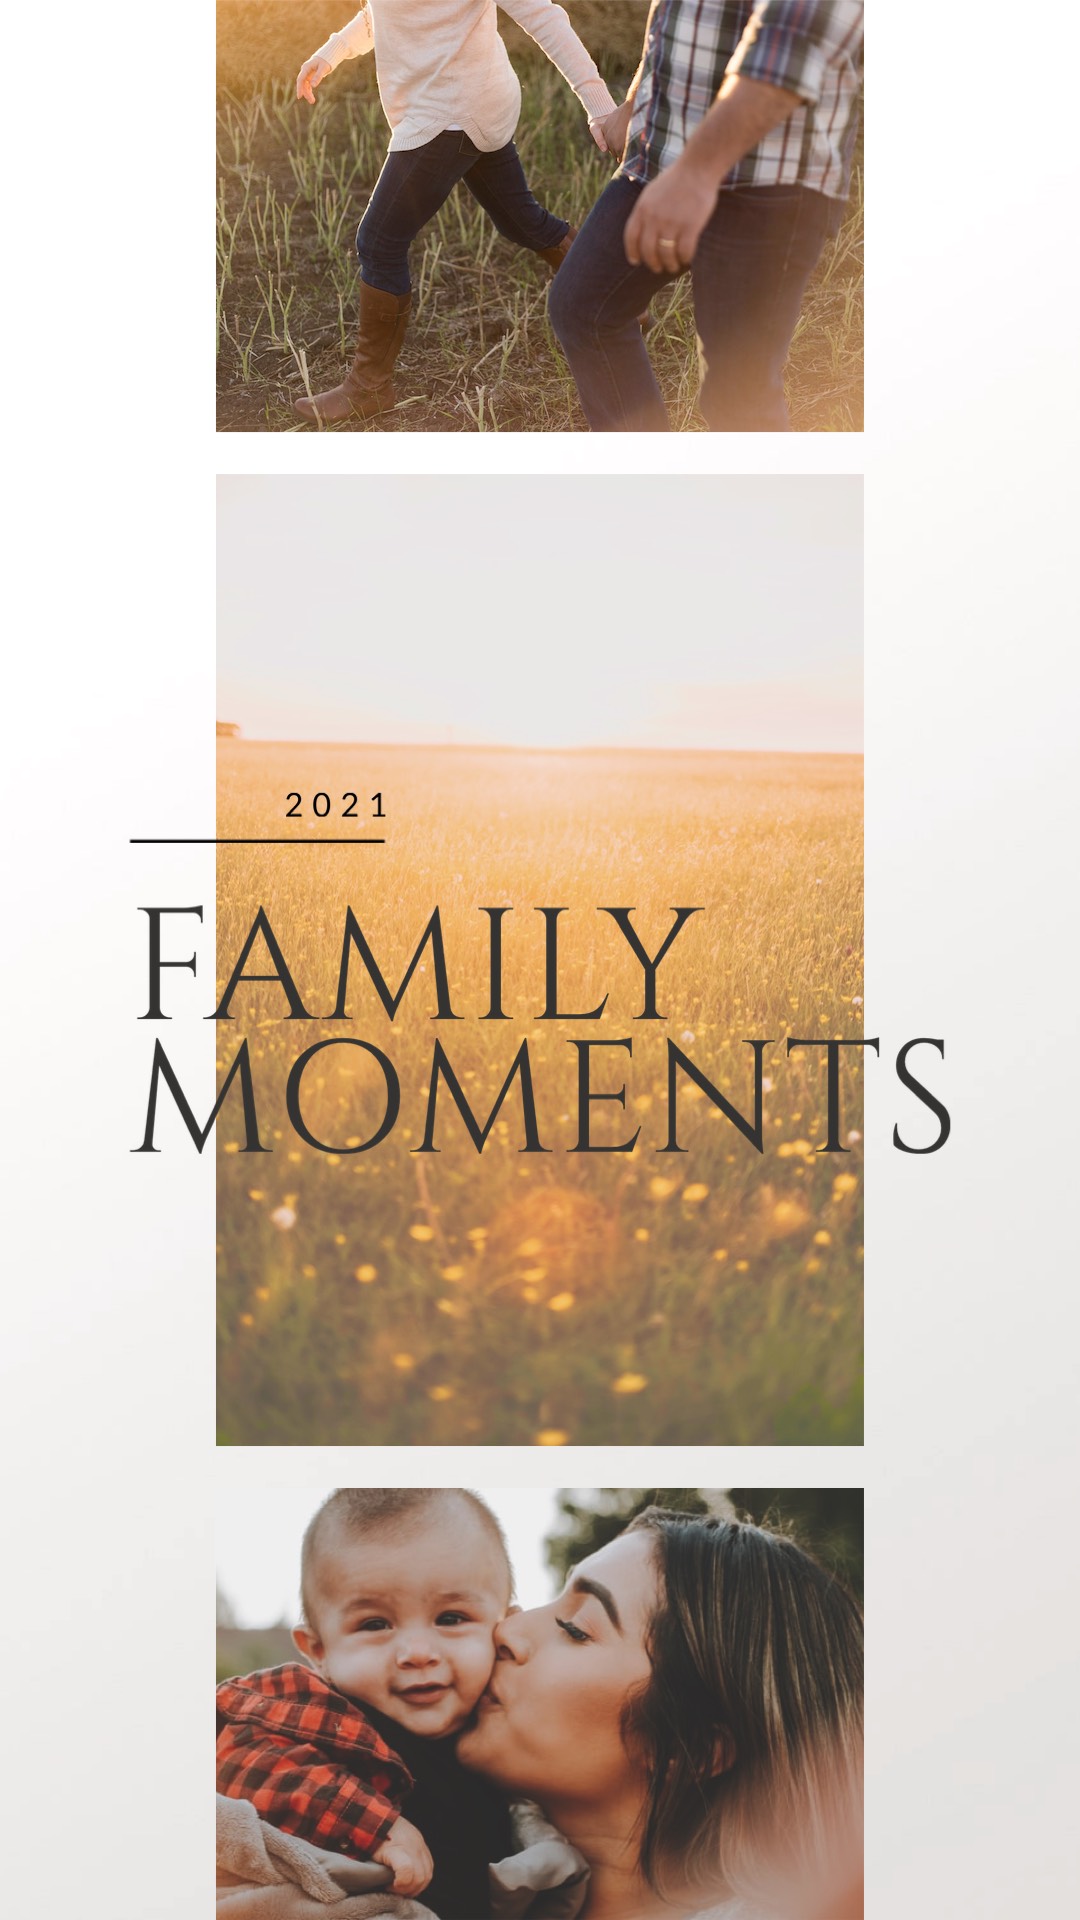 Family moments 2021 mother and baby family template